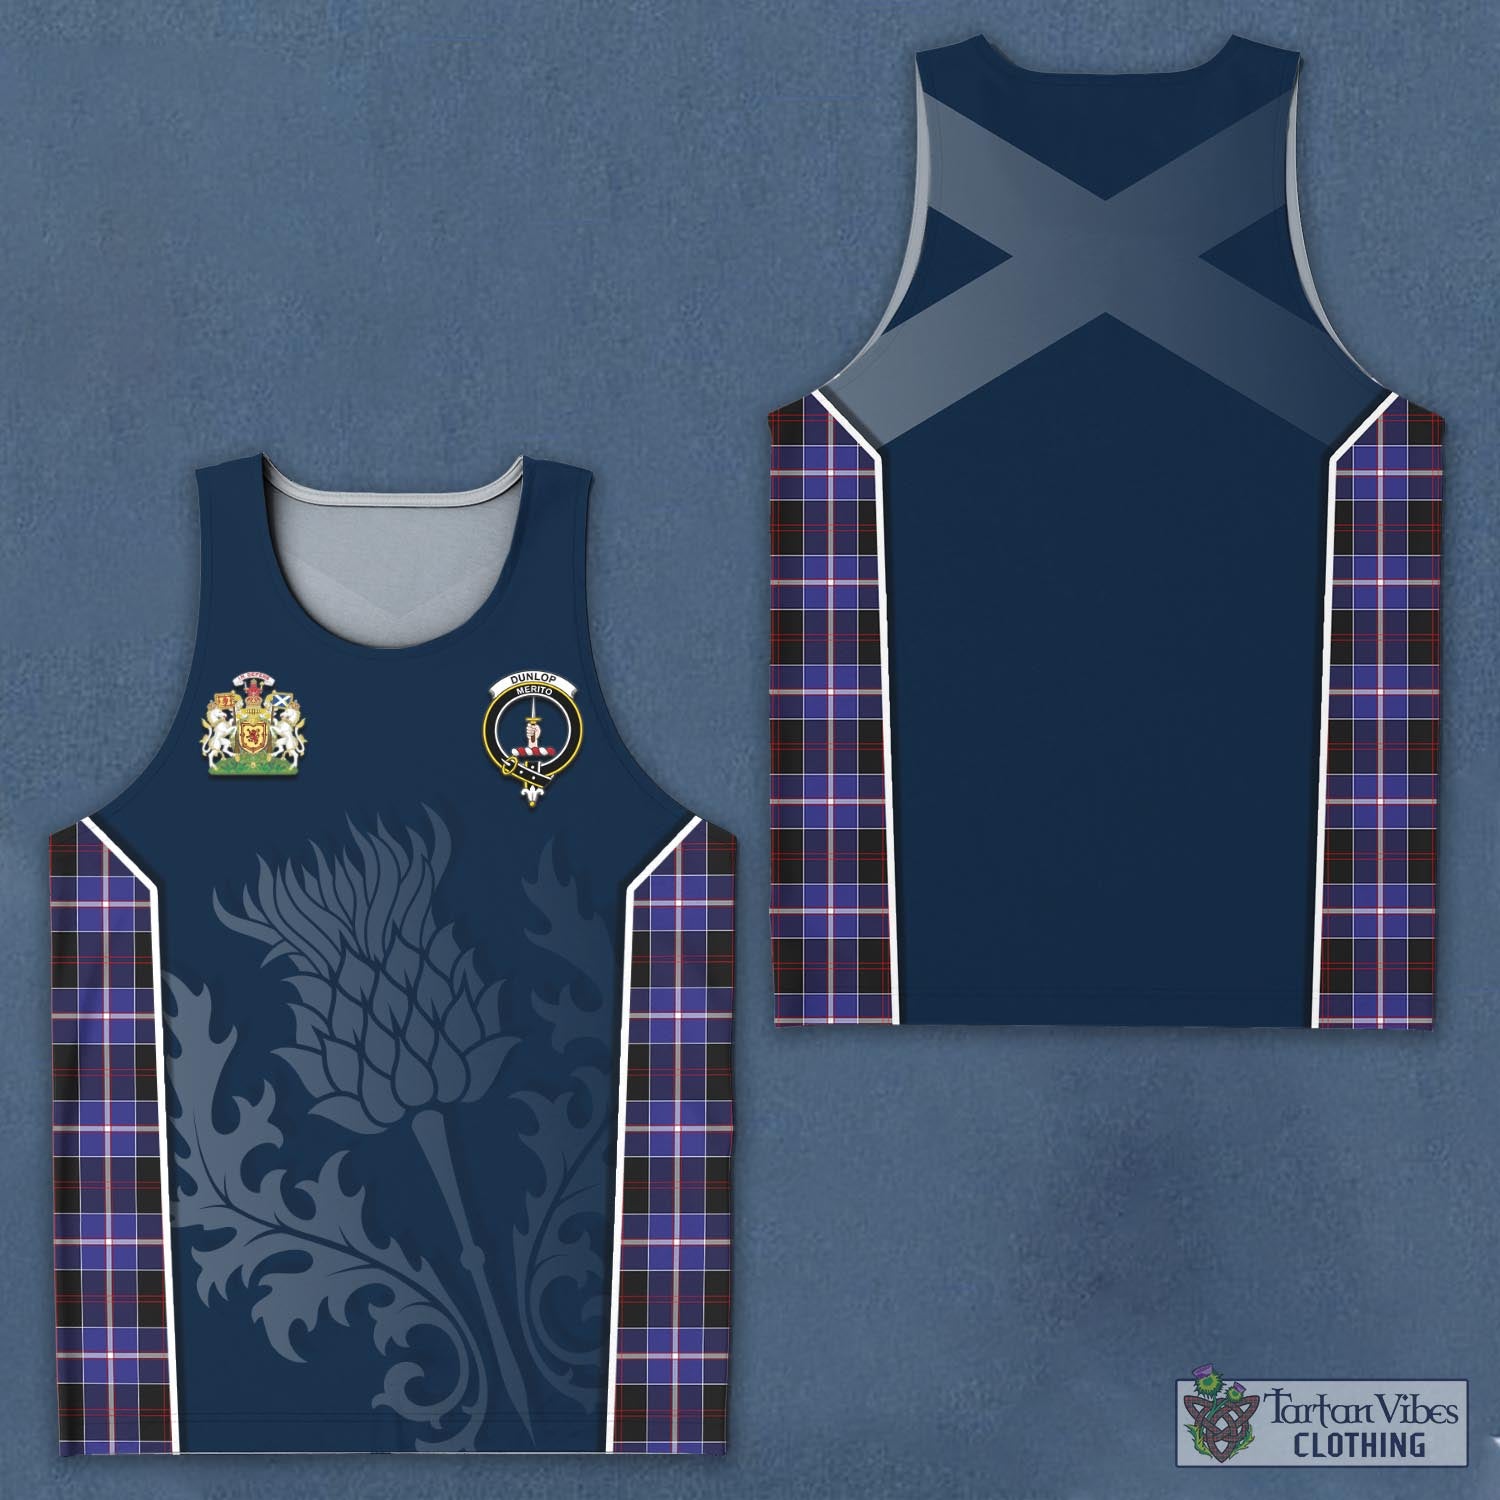 Tartan Vibes Clothing Dunlop Modern Tartan Men's Tanks Top with Family Crest and Scottish Thistle Vibes Sport Style